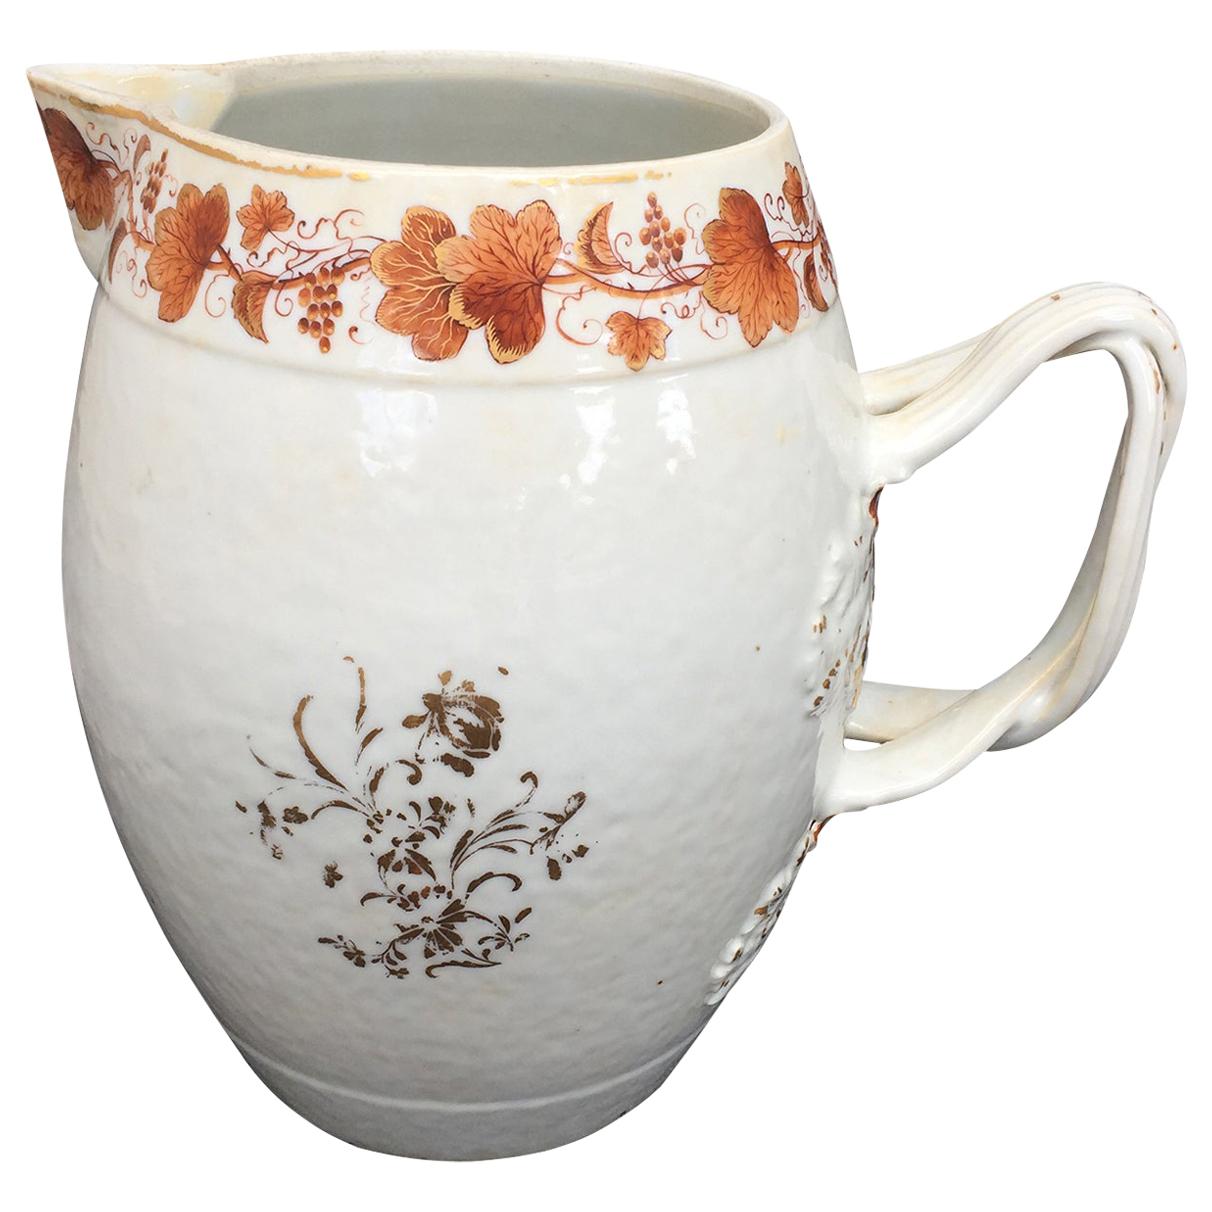 Early 19th Century circa 1800 Chinese Export Porcelain Pitcher For Sale